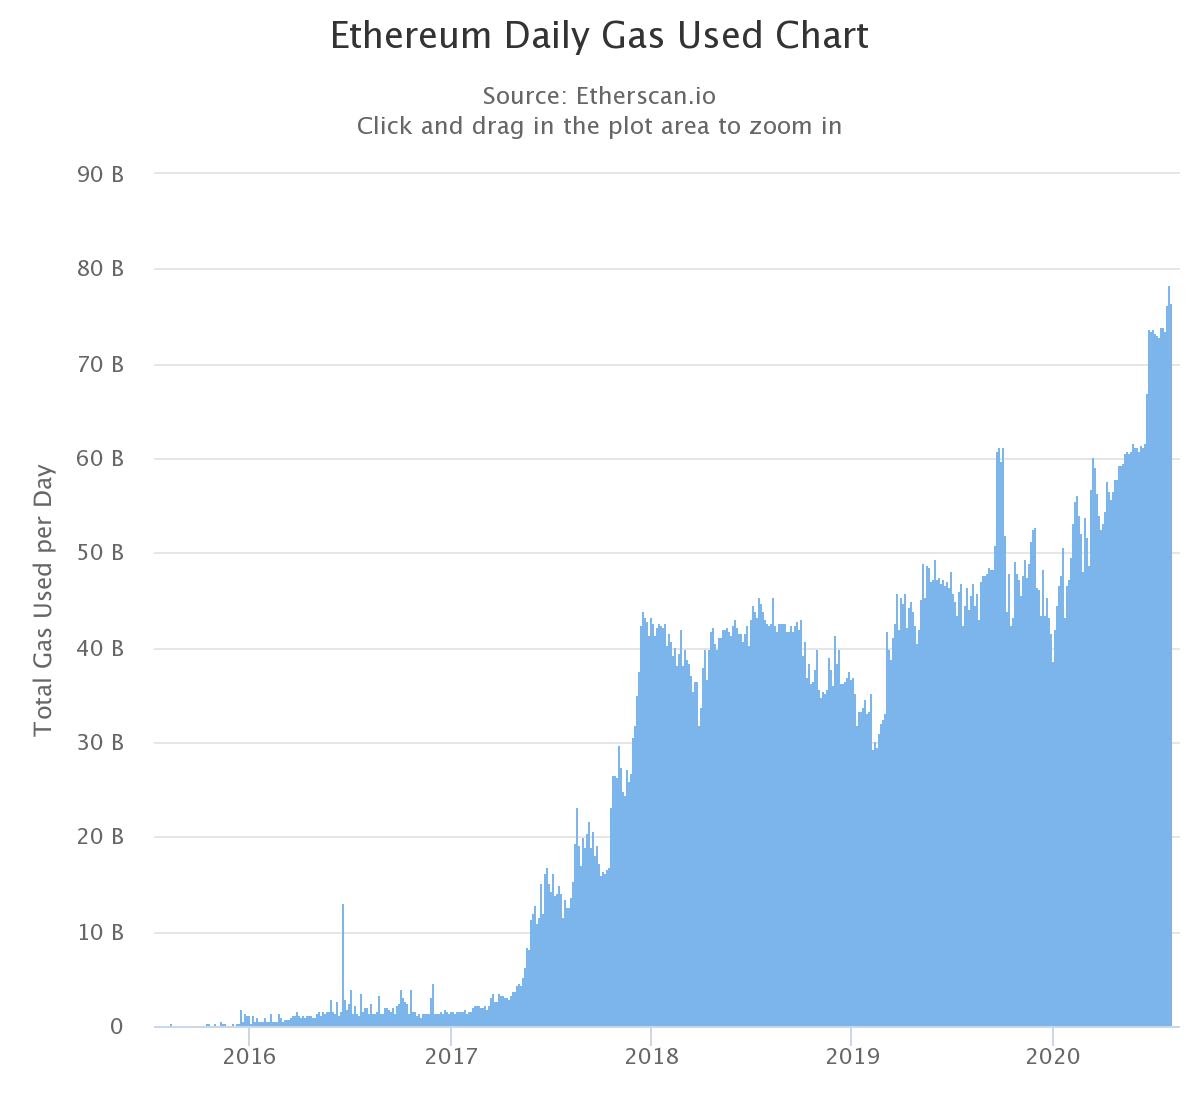 The daily gas used on Ethereum